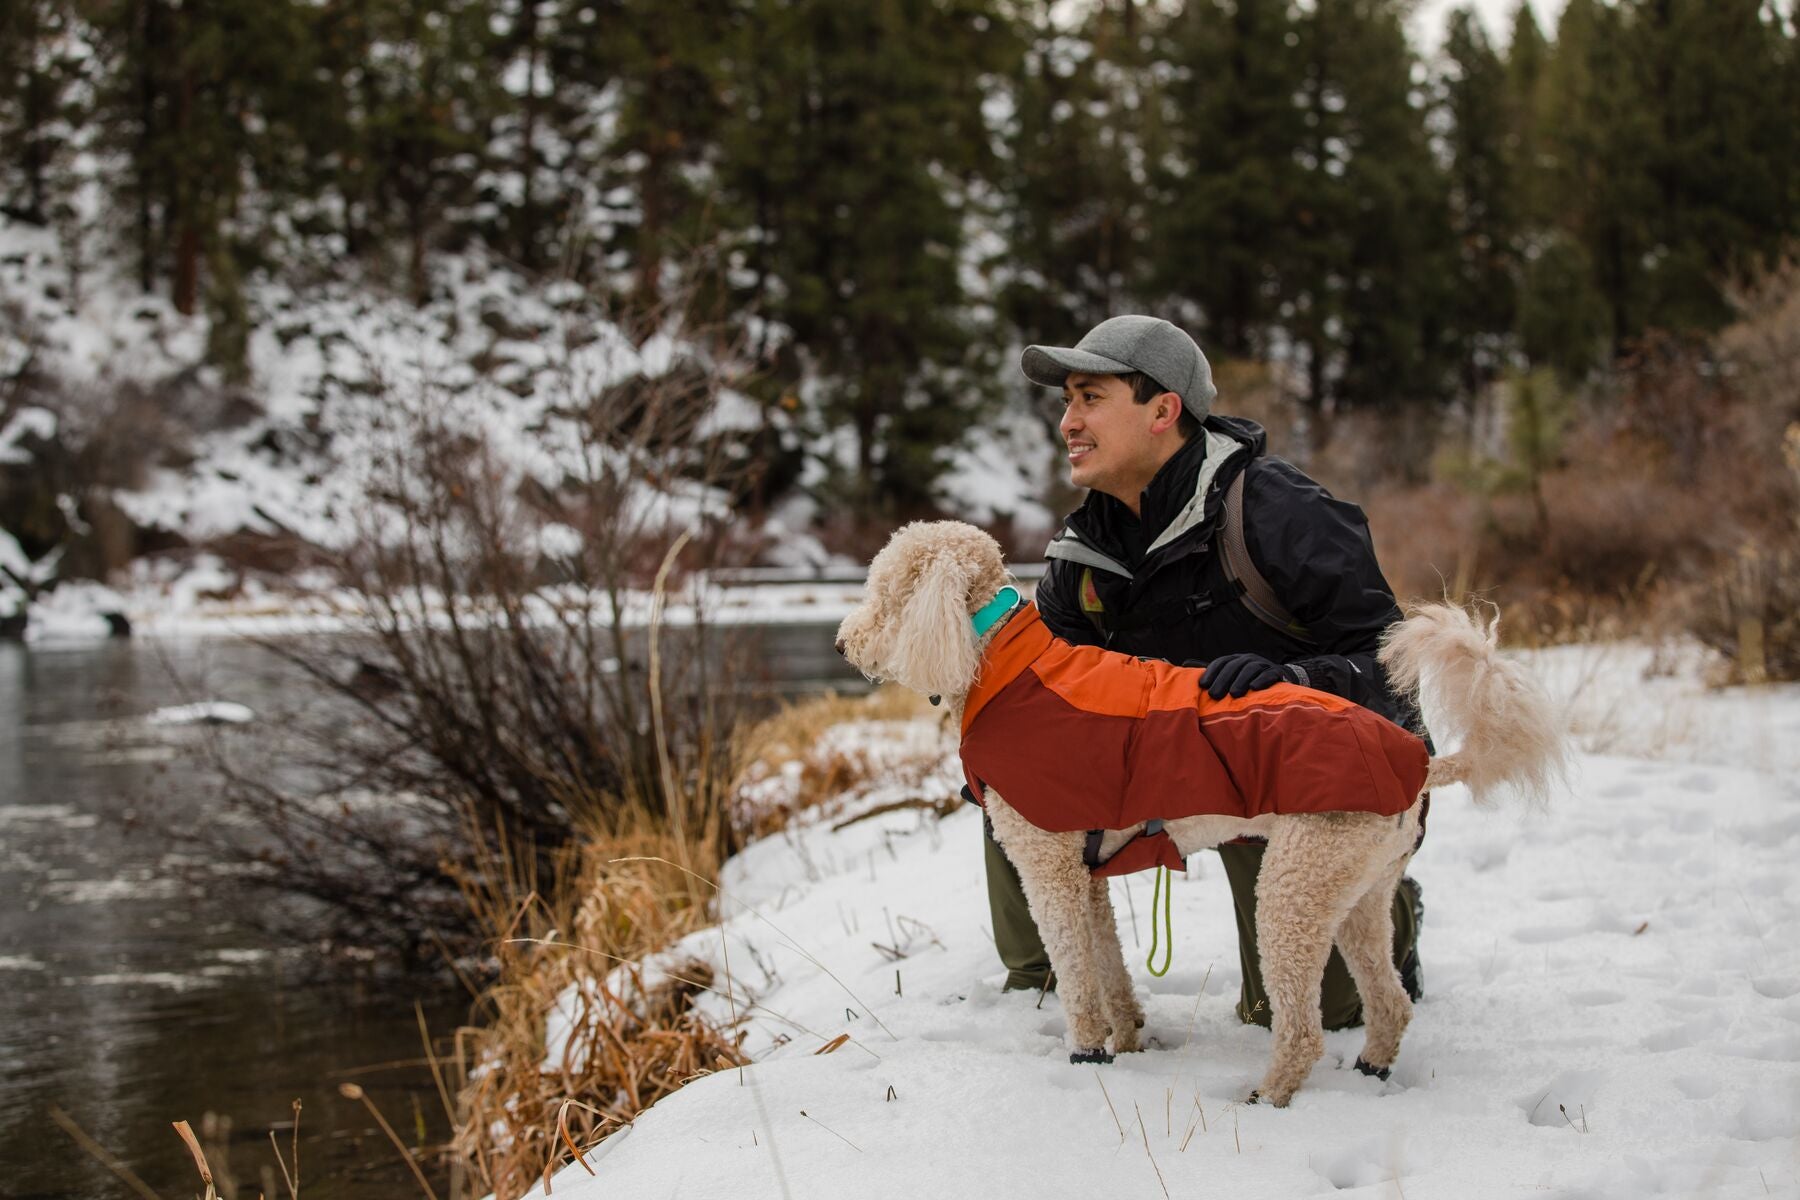 Man sits besides dog in Vert jacket on snowy trail.